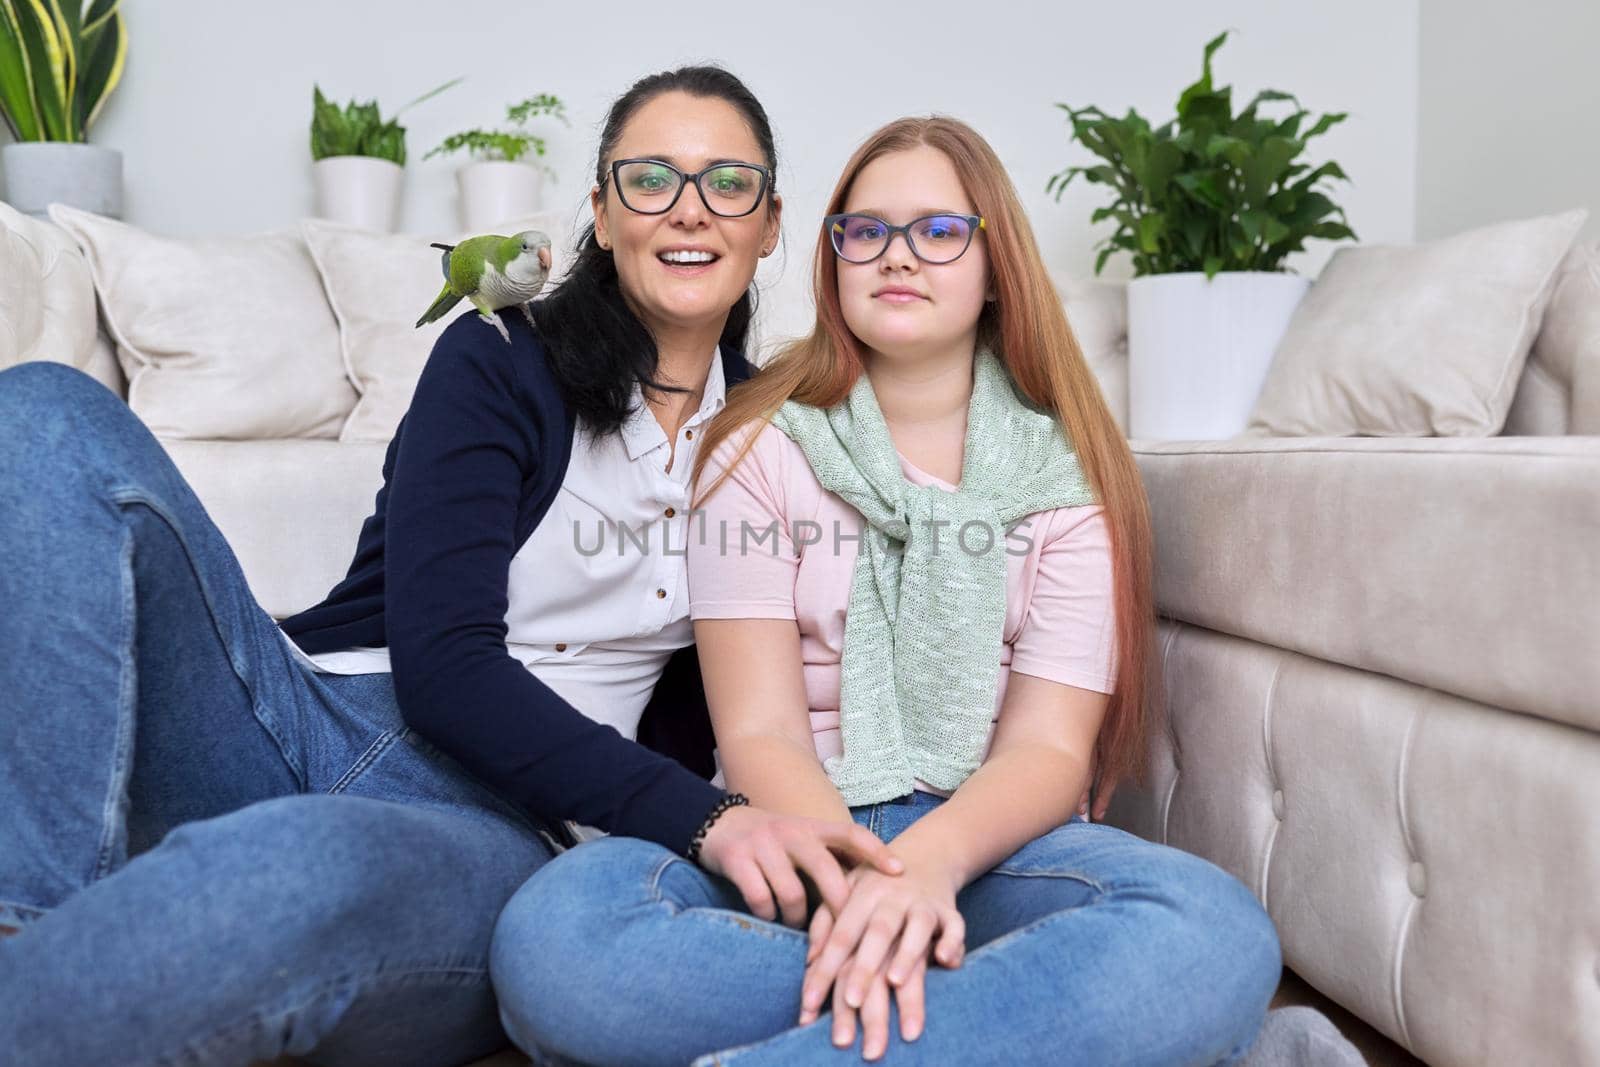 Friendly cheerful family, portrait of mom and teenage daughter, with green pet quaker parrot on woman's shoulder